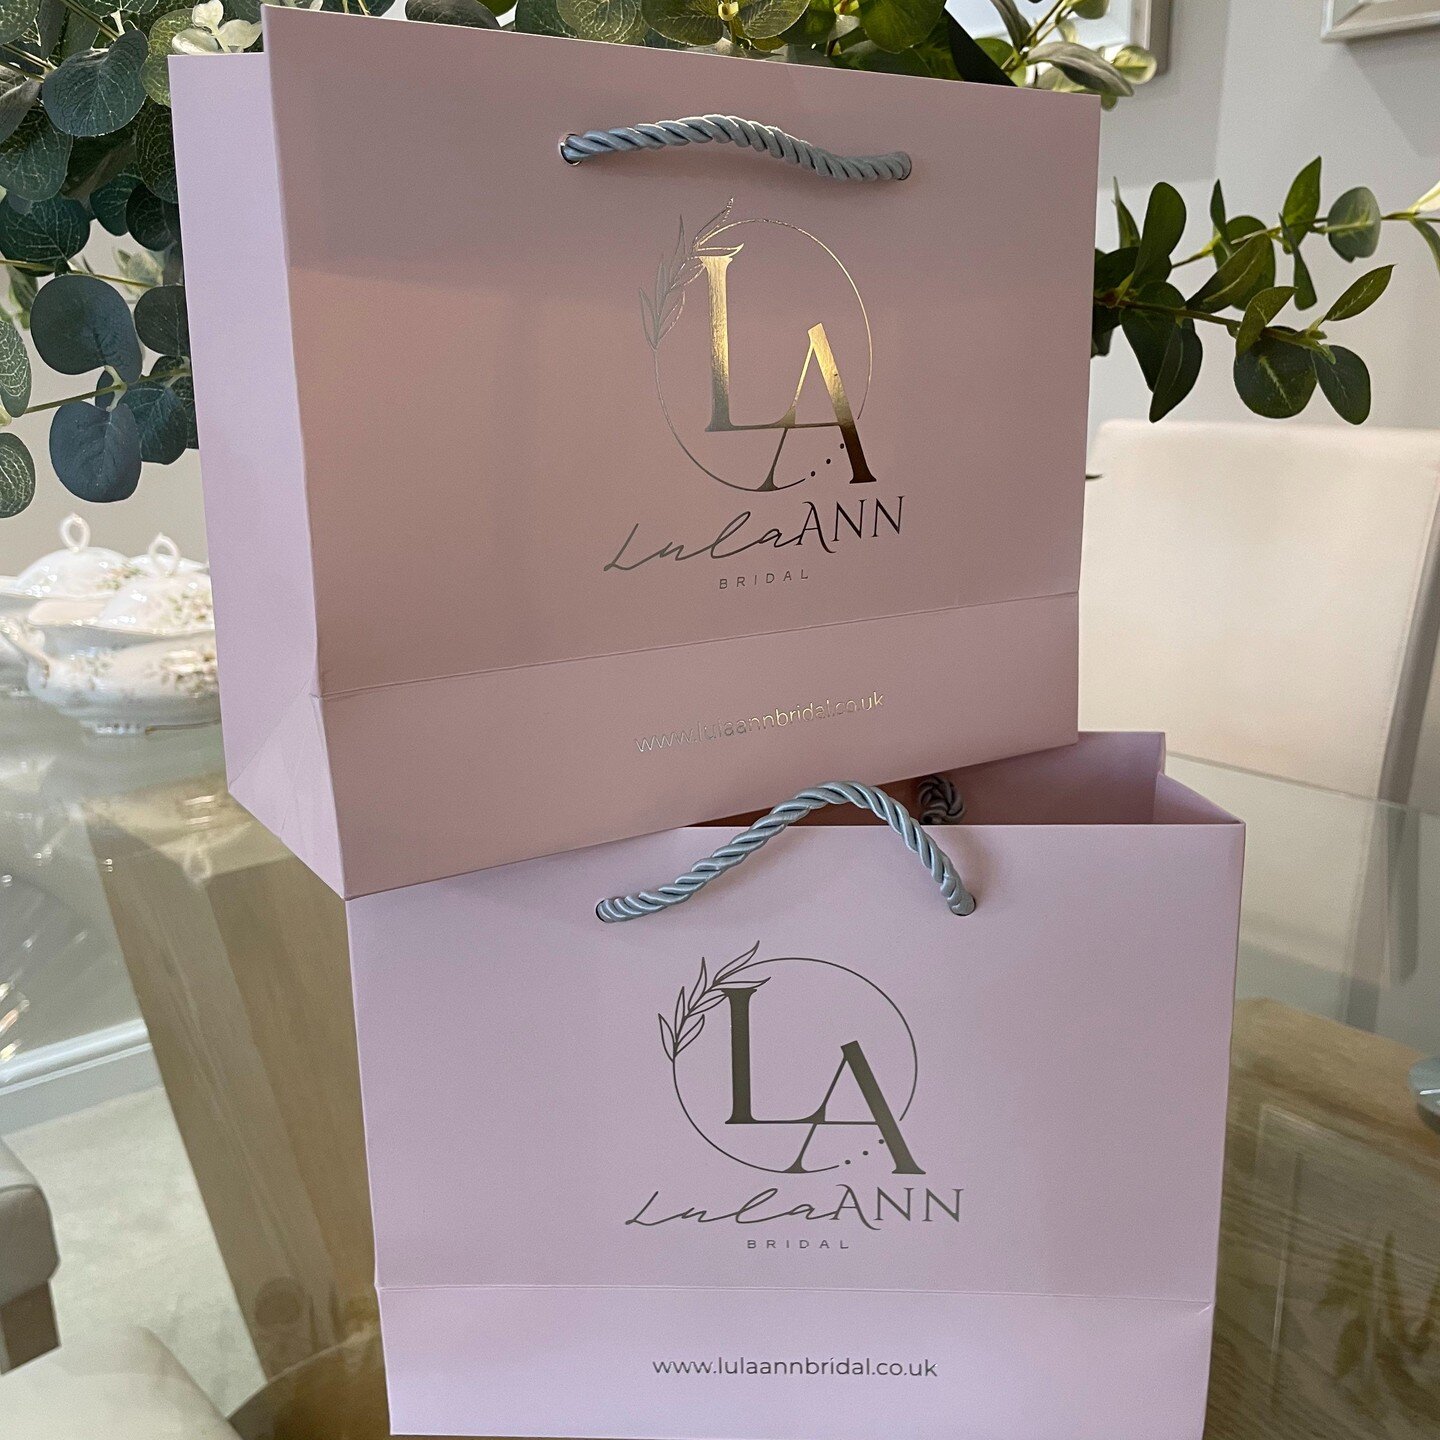 Pink and silver foil..we love these for @lulaannbridal so stylish with silver rope handles 😍

We can help with every aspect of your stationary and branded materials for your boutique 💗

With decades of experience, we&rsquo;re at your disposal with 